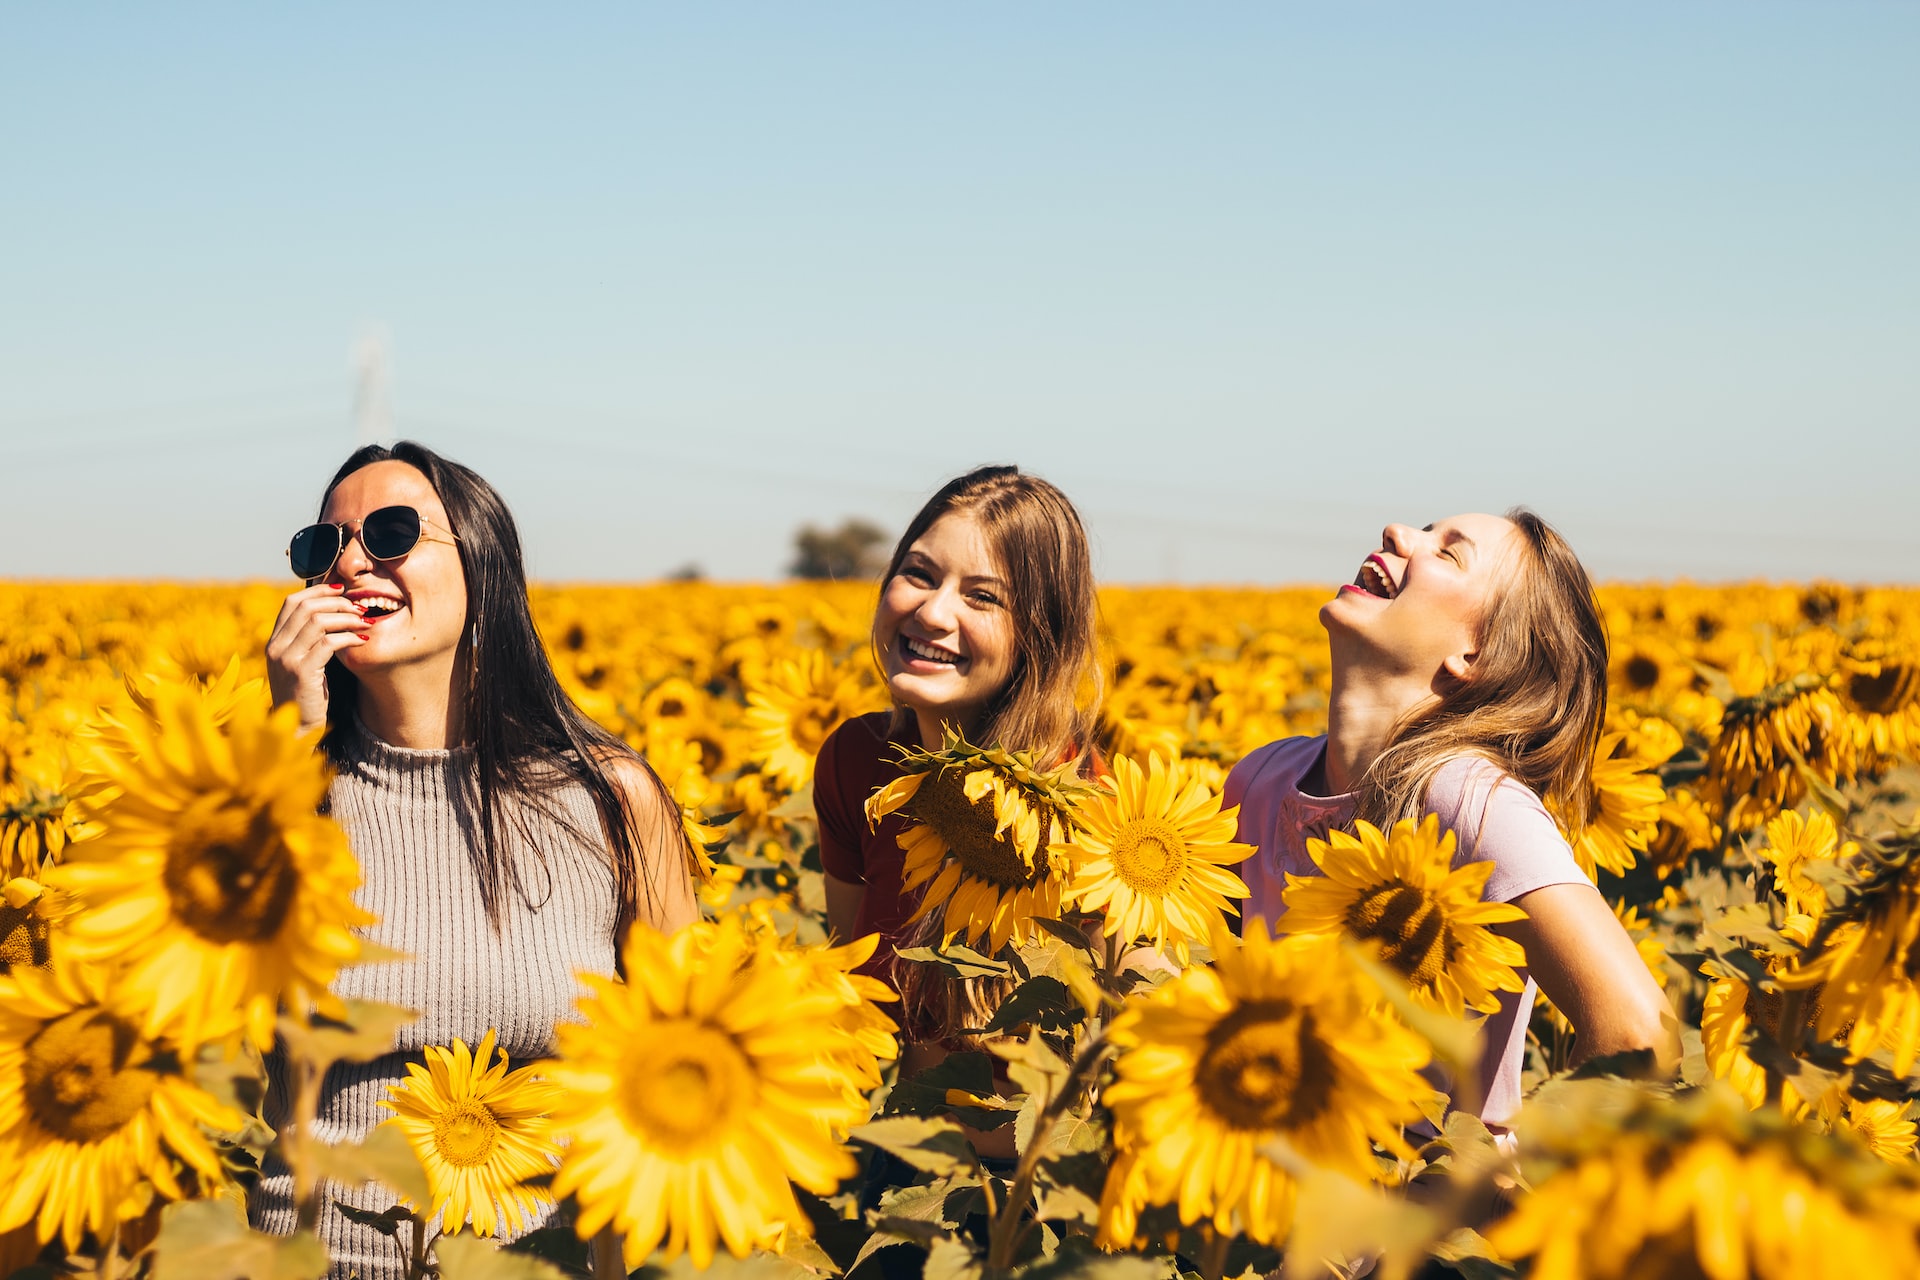 A group of friends laughing in a sunflower field 